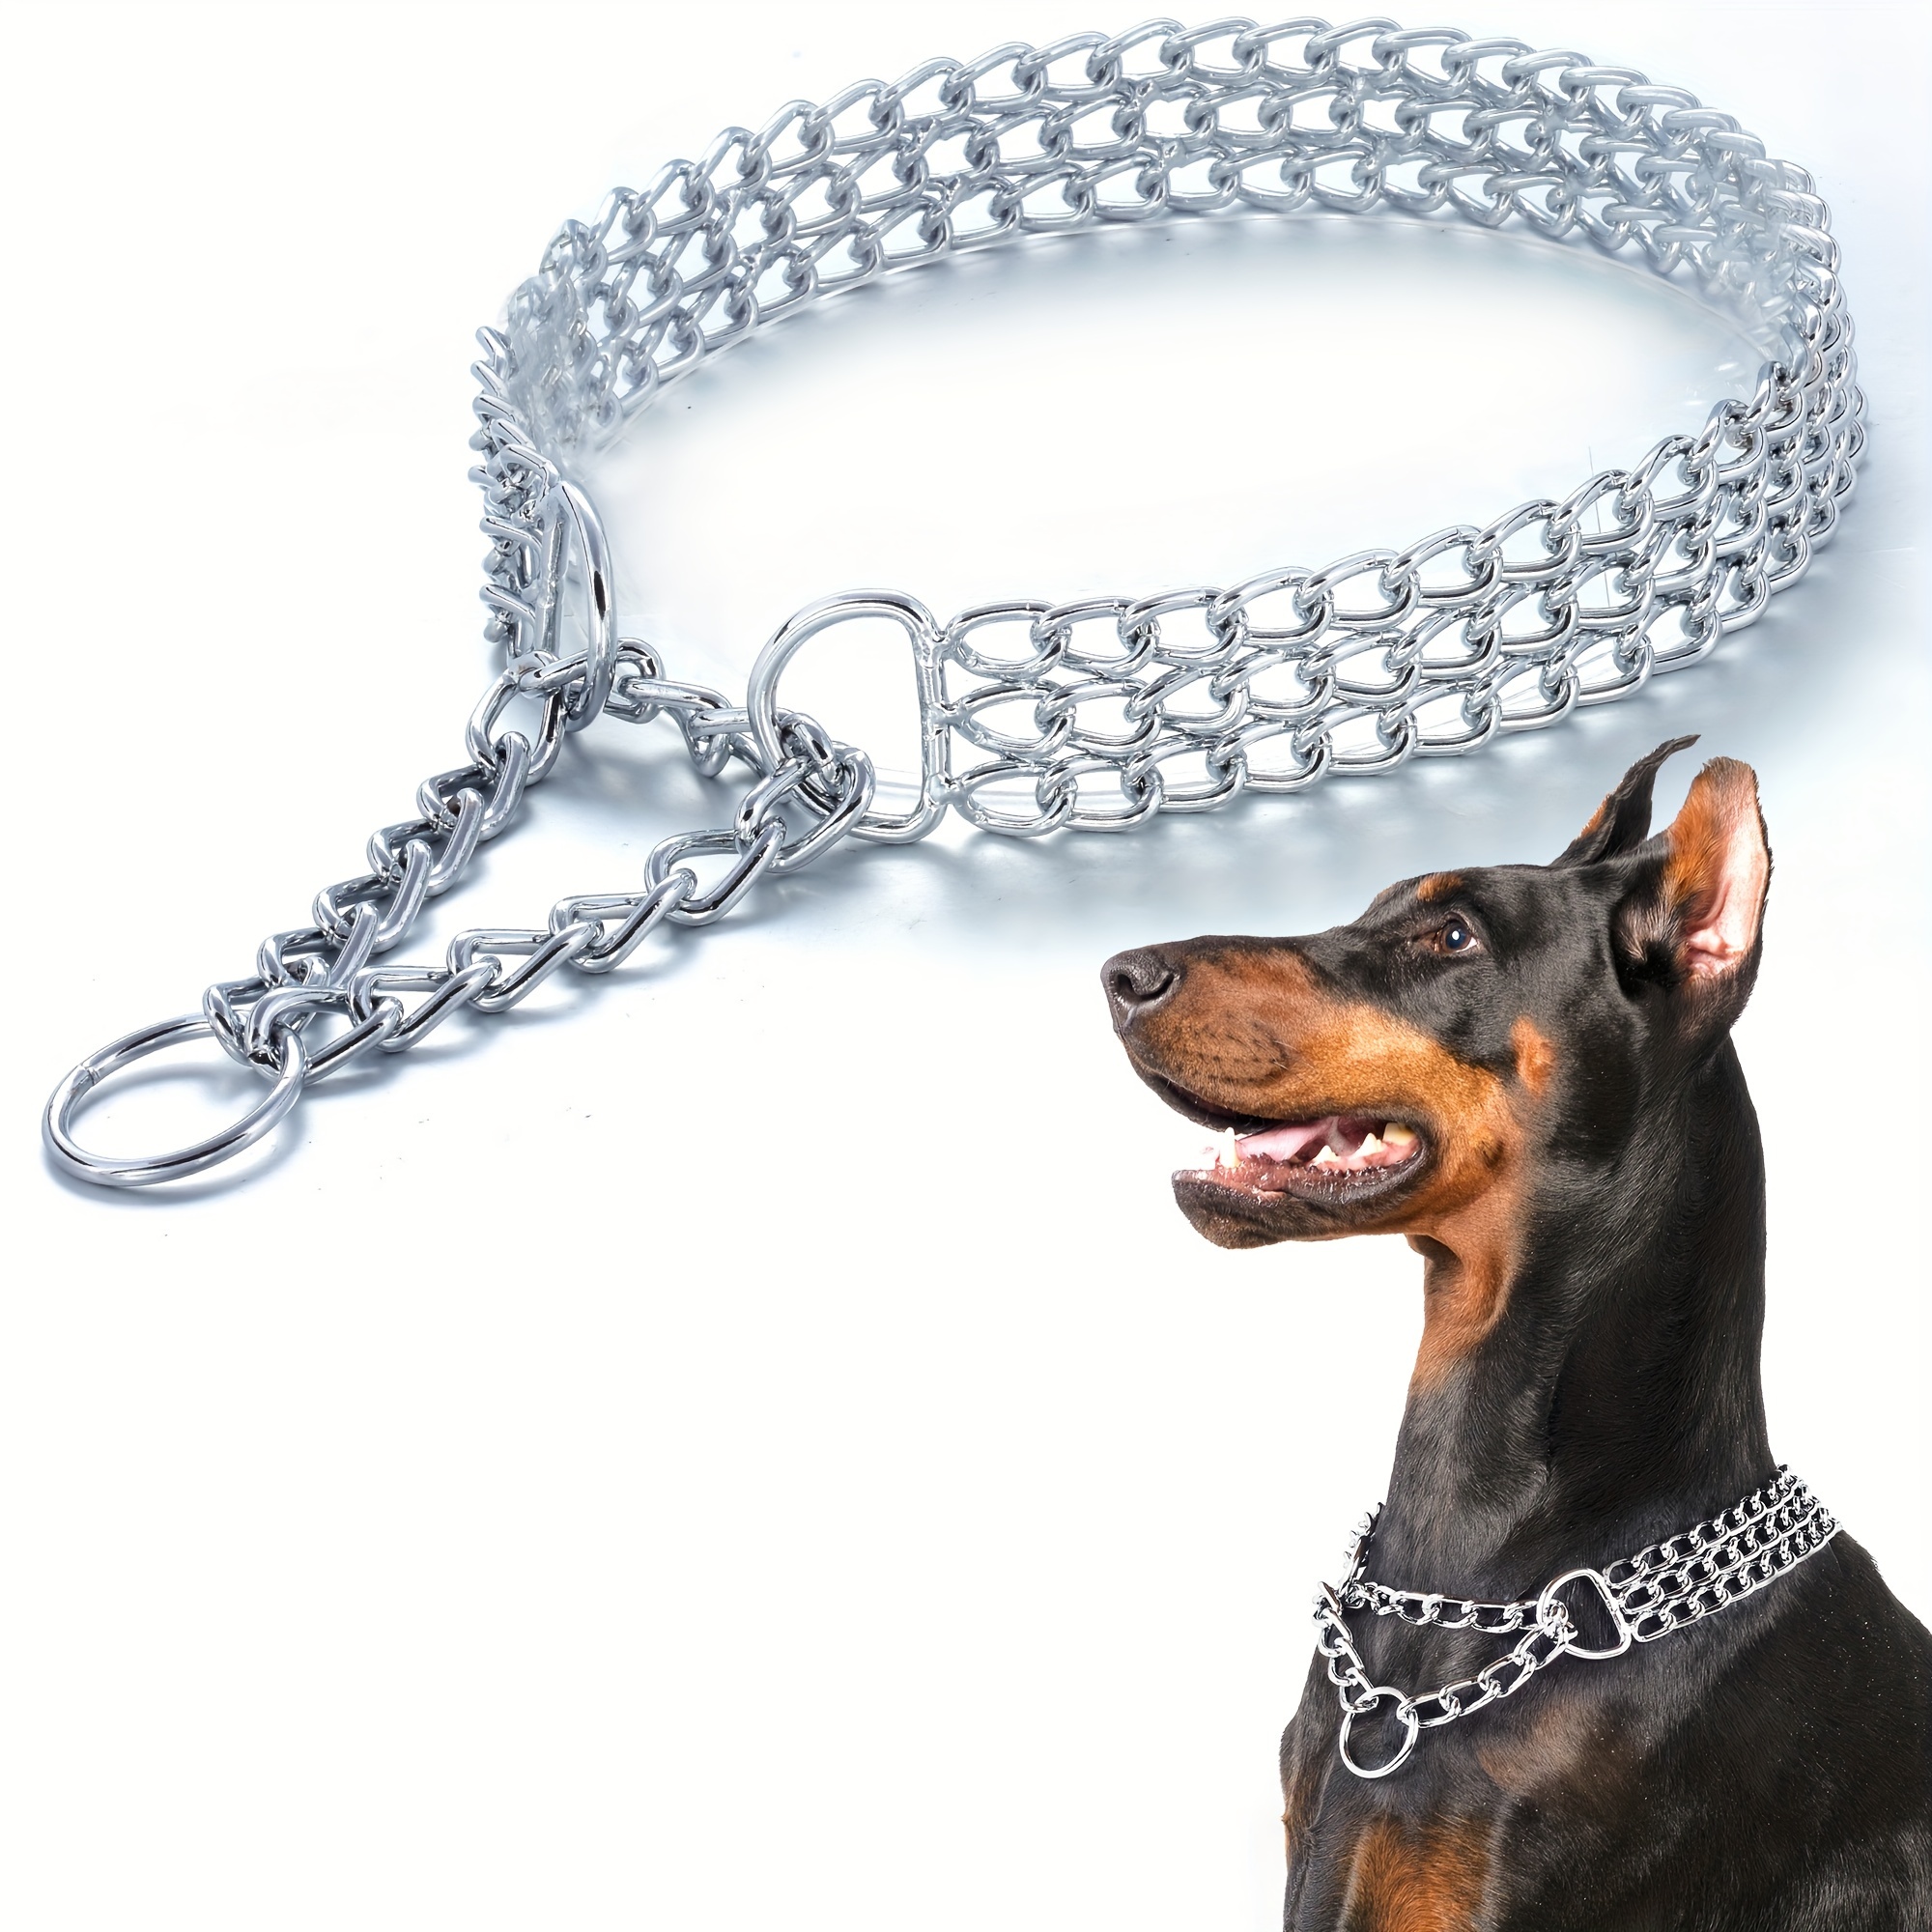 

Triple Row Stainless Steel Dog Chain Collar - Adjustable Walking Collar For Large, Medium, And Small Dogs - Chew Proof And Durable Cuban Link Design